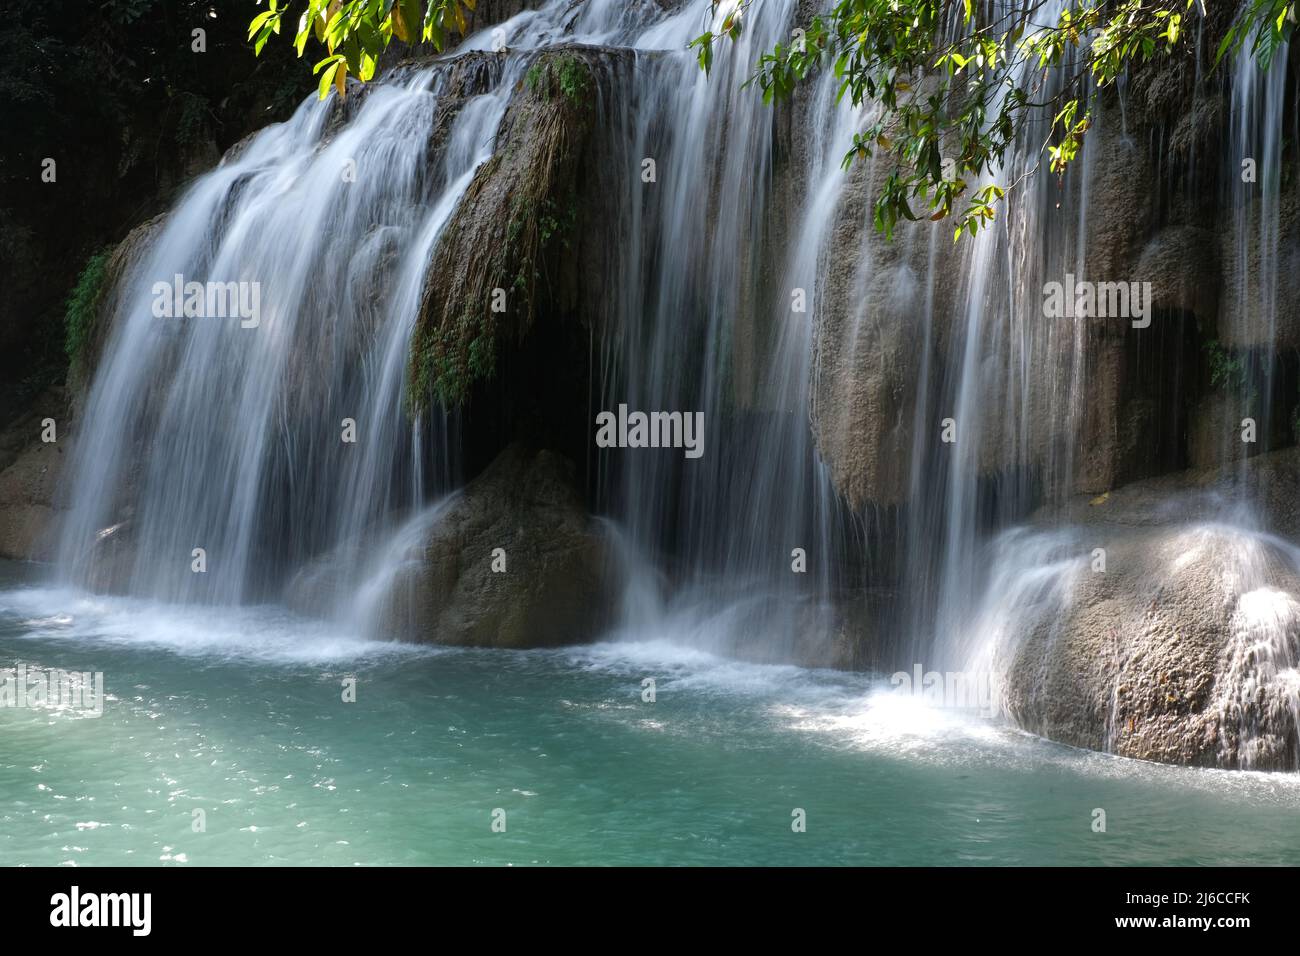 Waterfall on a clean emerald river covers a small cave, at one of the cascades of Erawan Falls in Thailand Stock Photo